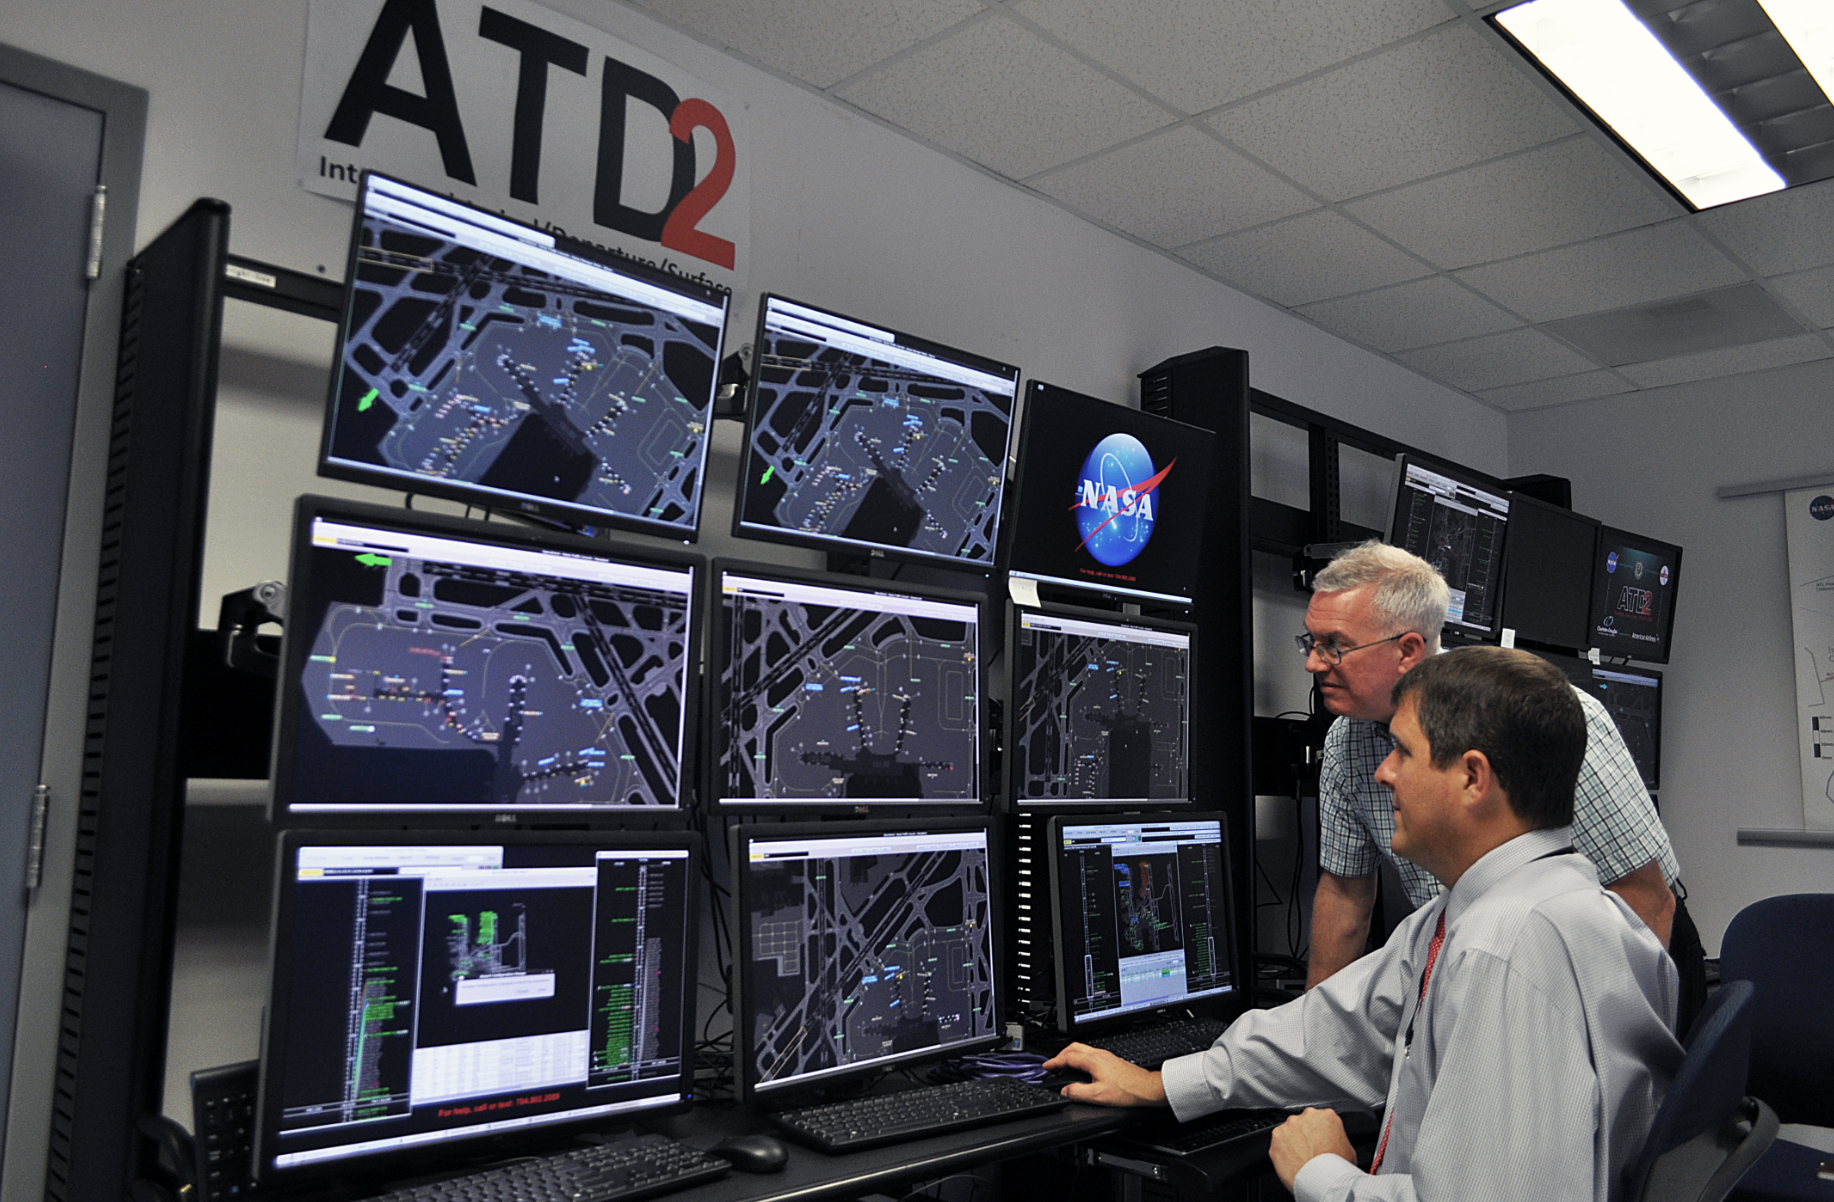 air traffic management laboratory near the Dallas/Ft. Worth International Airport in Texas